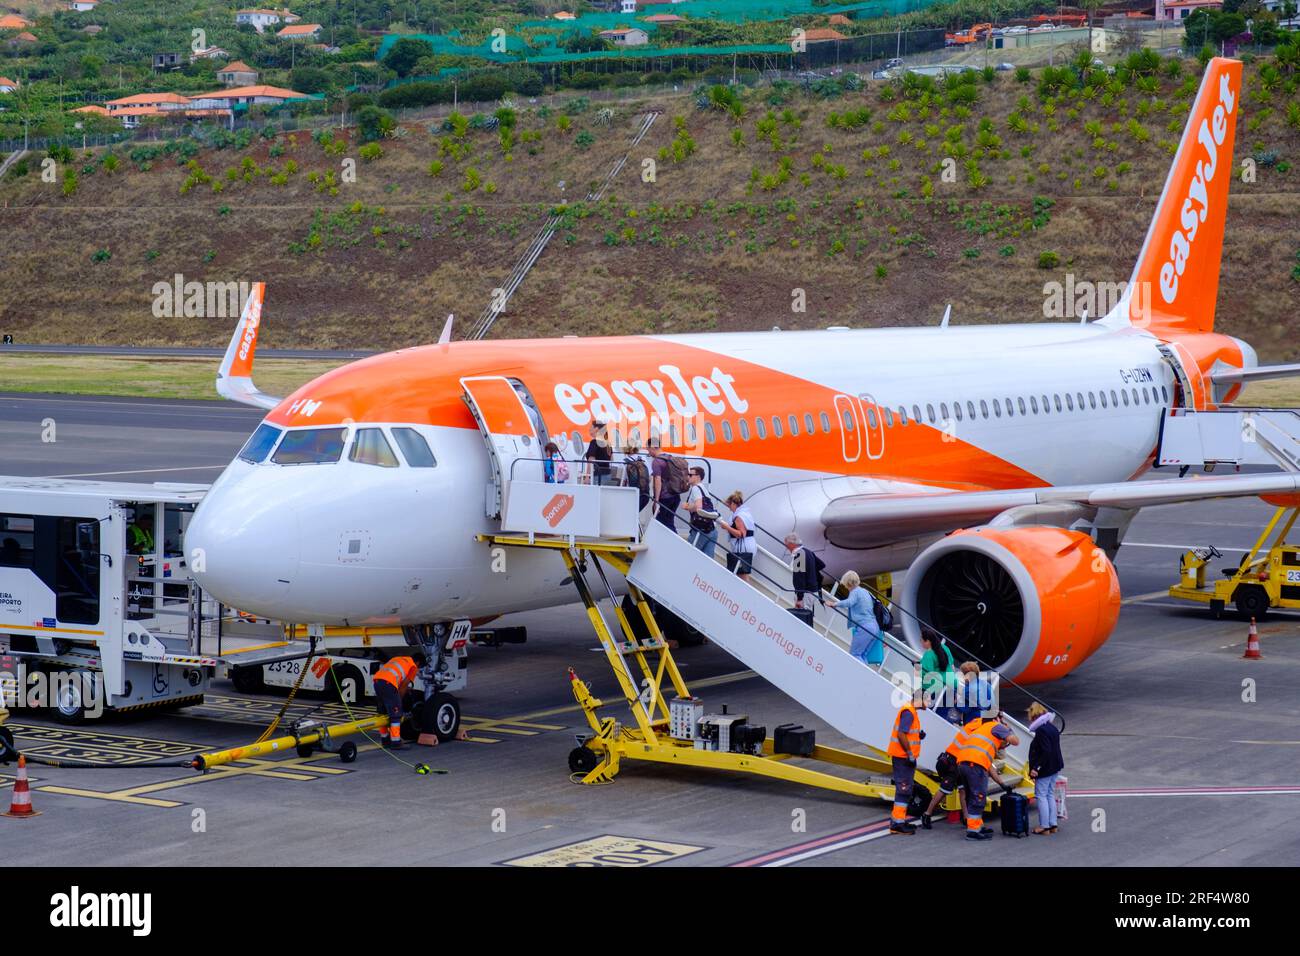 Air travel, Easyjet plane, passengers in queue boarding an Easyjet Airbus A320-251N at the tarmac, Madeira Island Airport, Funchal, Portugal Stock Photo